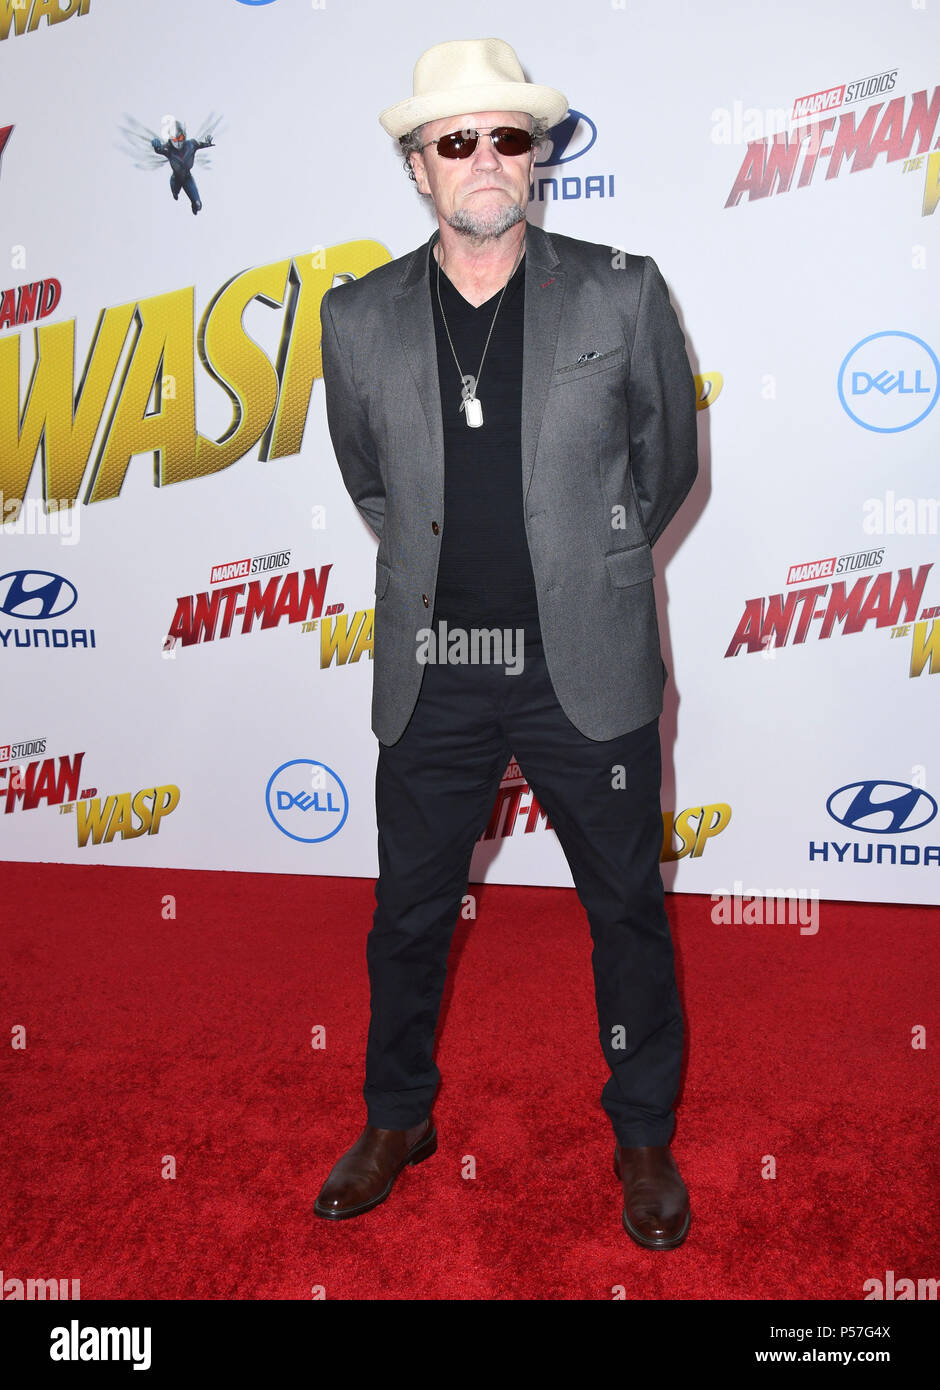 Hollywood, CA, USA. 25th June, 2018. 25 June 2018 - Hollywood, California - Michael Rooker. ''Ant-Man and The Wasp' Los Angeles Premiere held at theEl Capitan Theatre. Photo Credit: Birdie Thompson/AdMedia Credit: Birdie Thompson/AdMedia/ZUMA Wire/Alamy Live News Stock Photo